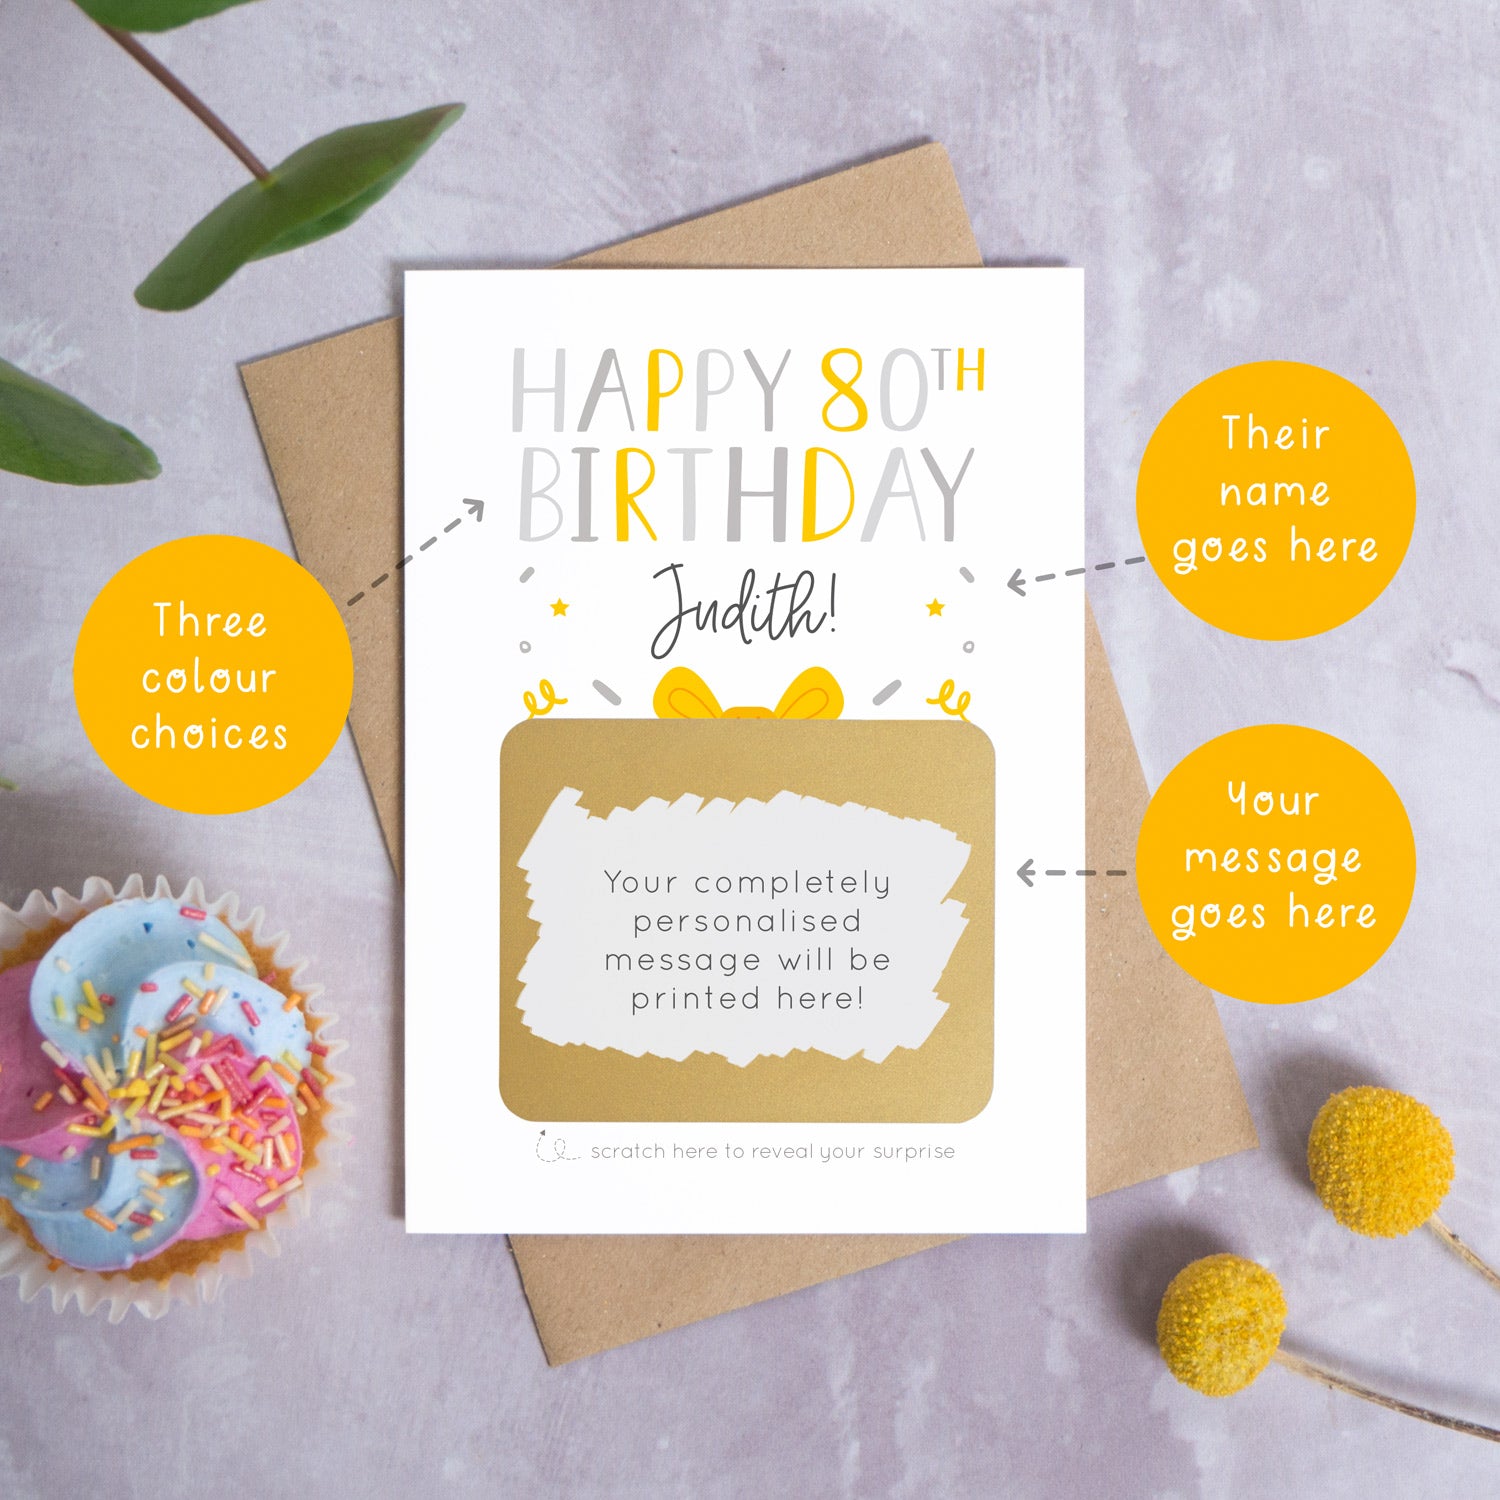 A personalised happy 80th birthday scratch card in grey that has been photographed on a grey background with foliage and a cupcake. There are also orange circles laid over the top of this image with arrows pointing to the areas that can be customised. In this instance they point to the name, the colour choices and the personalised scratch off message.